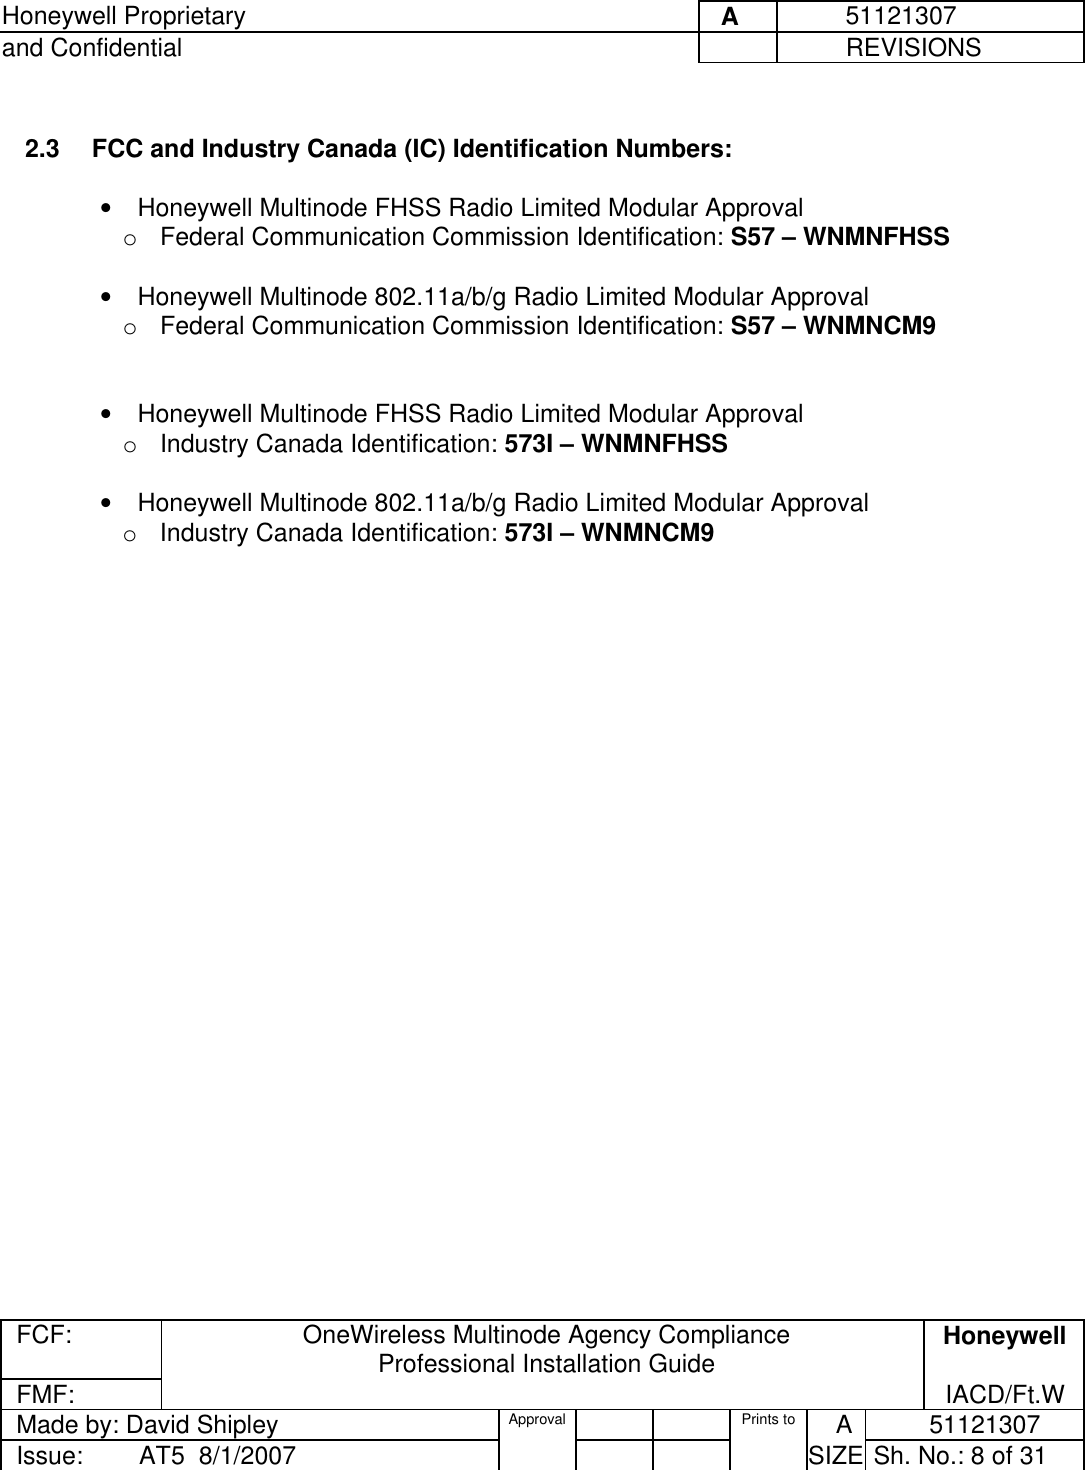 Honeywell Proprietary     A          51121307 and Confidential             REVISIONS  FCF:  OneWireless Multinode Agency Compliance Professional Installation Guide  Honeywell FMF:               IACD/Ft.W Made by: David Shipley  Approval   Prints to     A           51121307 Issue:        AT5  8/1/2007          SIZE  Sh. No.: 8 of 31   2.3   FCC and Industry Canada (IC) Identification Numbers:   •  Honeywell Multinode FHSS Radio Limited Modular Approval    o  Federal Communication Commission Identification: S57 – WNMNFHSS   •  Honeywell Multinode 802.11a/b/g Radio Limited Modular Approval    o  Federal Communication Commission Identification: S57 – WNMNCM9    •  Honeywell Multinode FHSS Radio Limited Modular Approval    o  Industry Canada Identification: 573I – WNMNFHSS   •  Honeywell Multinode 802.11a/b/g Radio Limited Modular Approval    o  Industry Canada Identification: 573I – WNMNCM9    